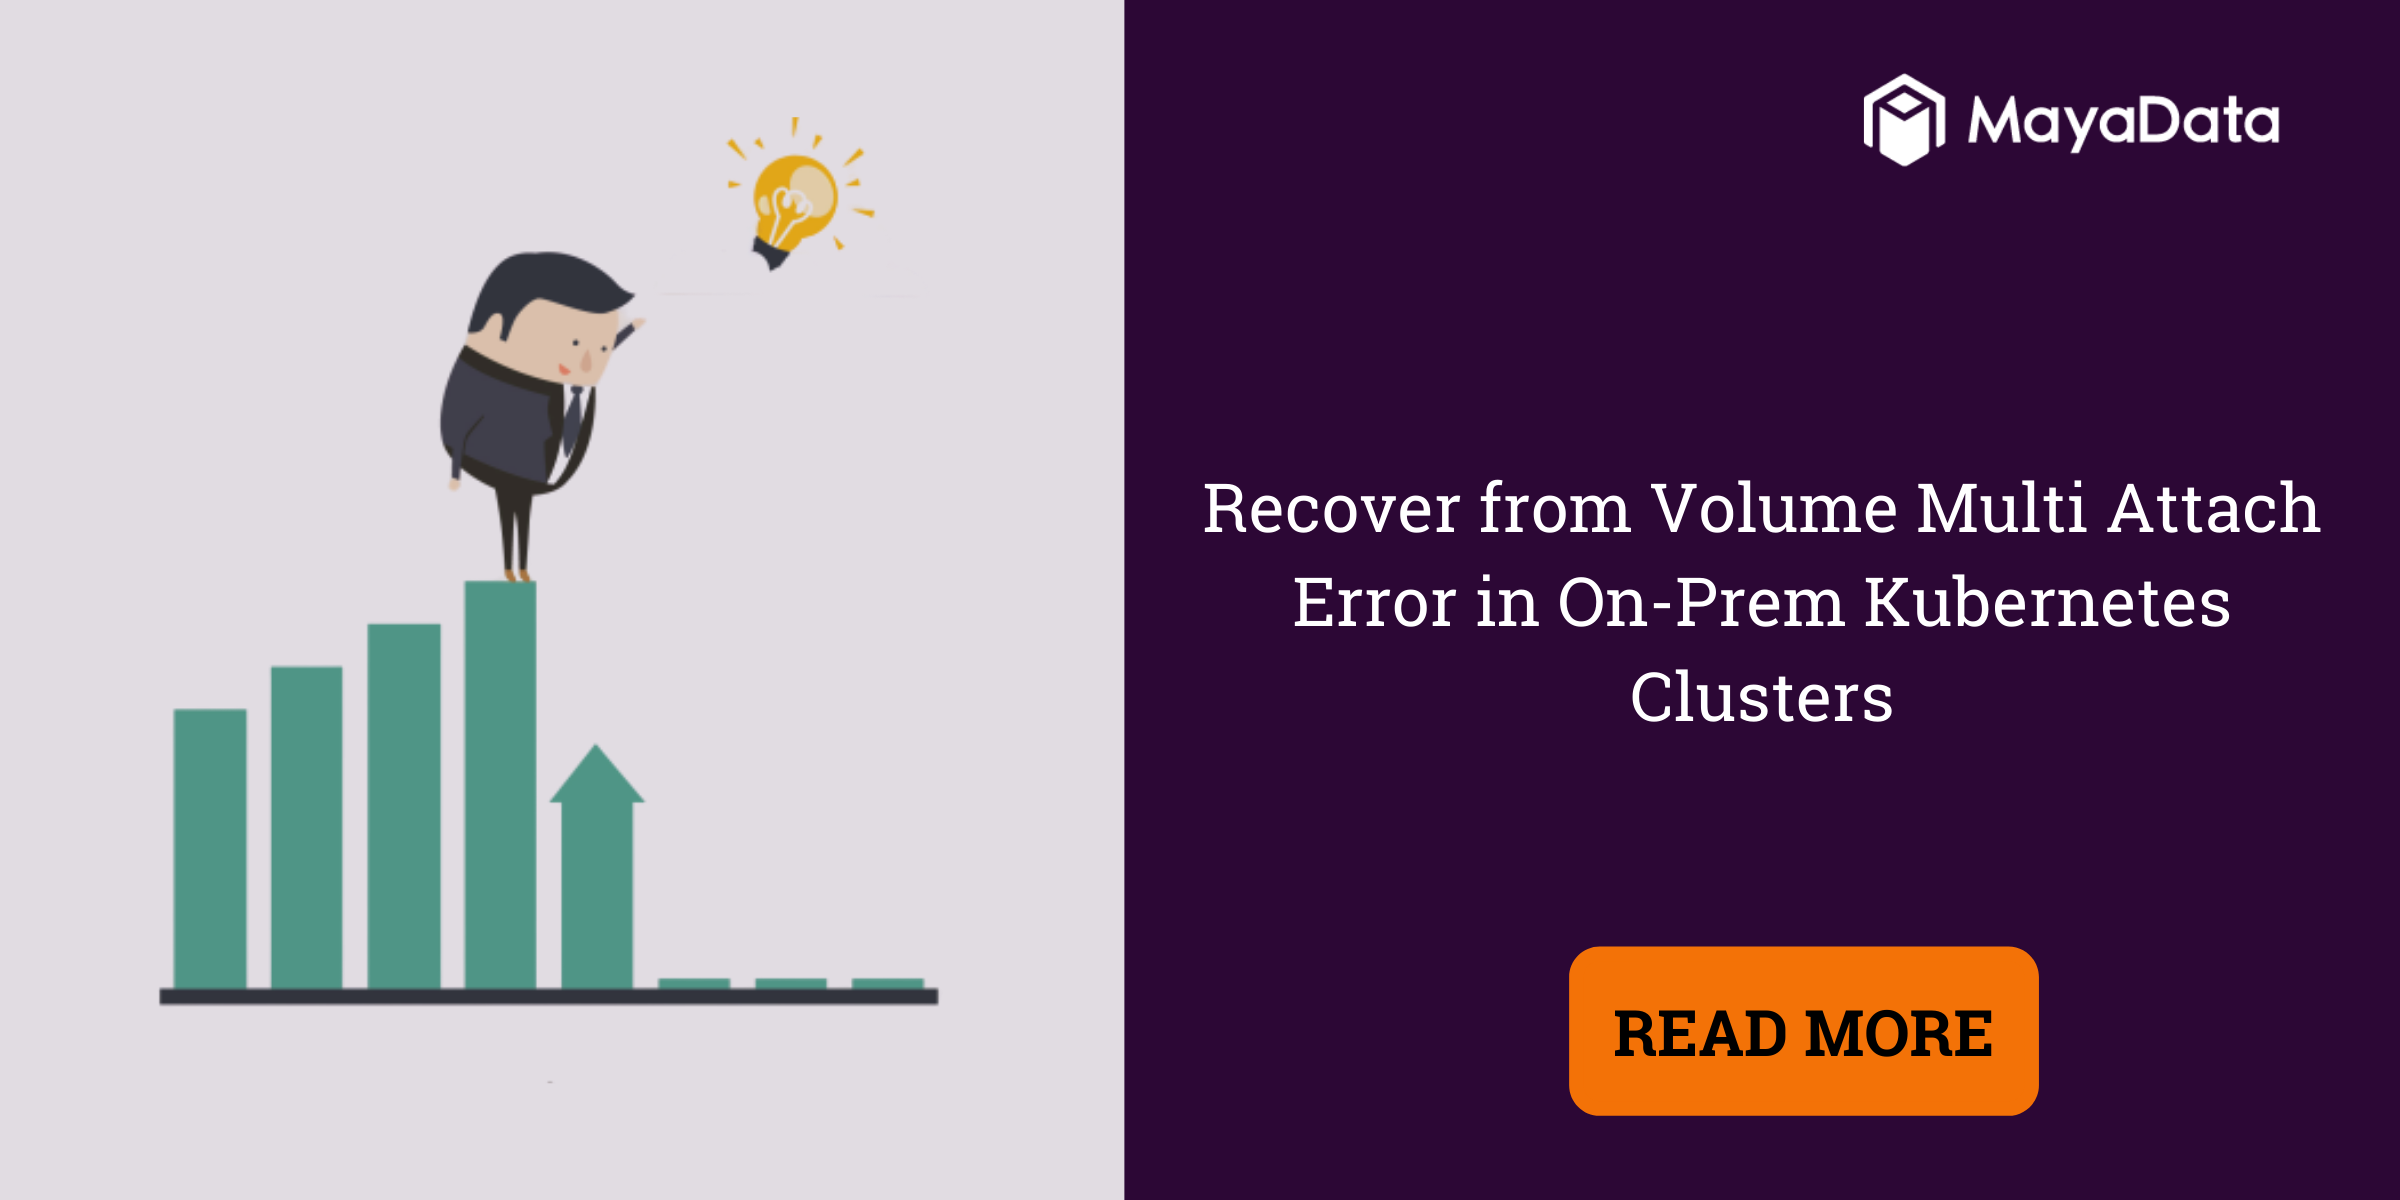 Recover from Volume Multi Attach Error in On-Prem Kubernetes Clusters